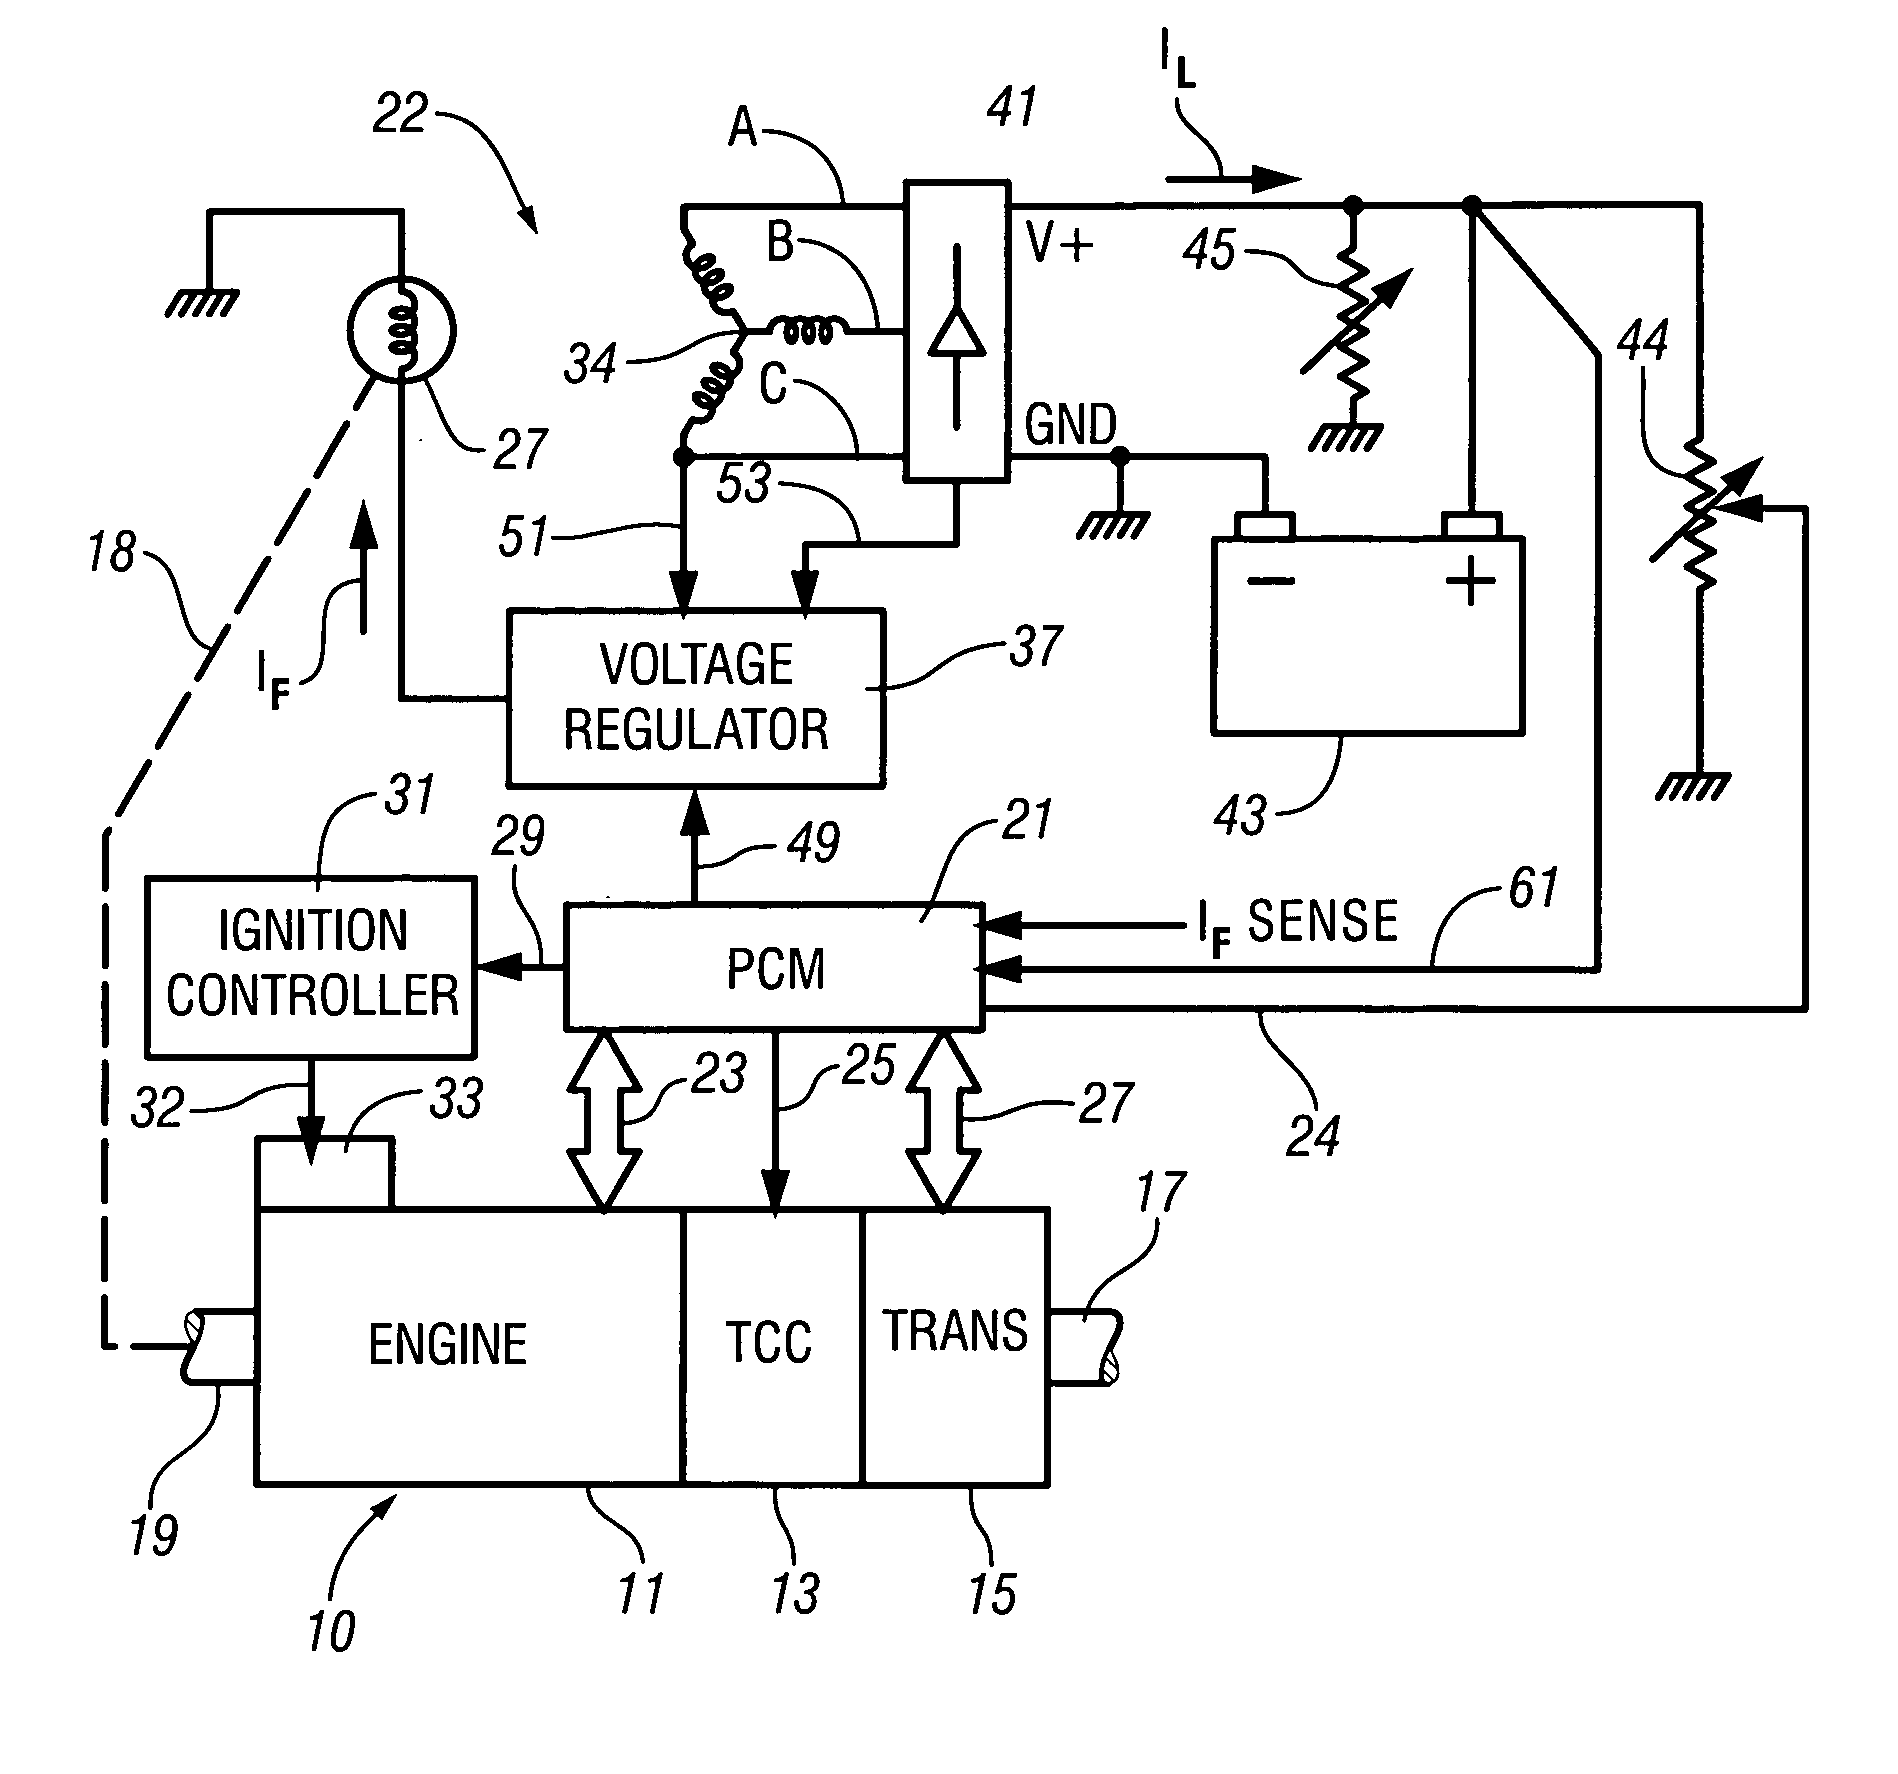 Apparatus and method for accelerated exhaust system component heating